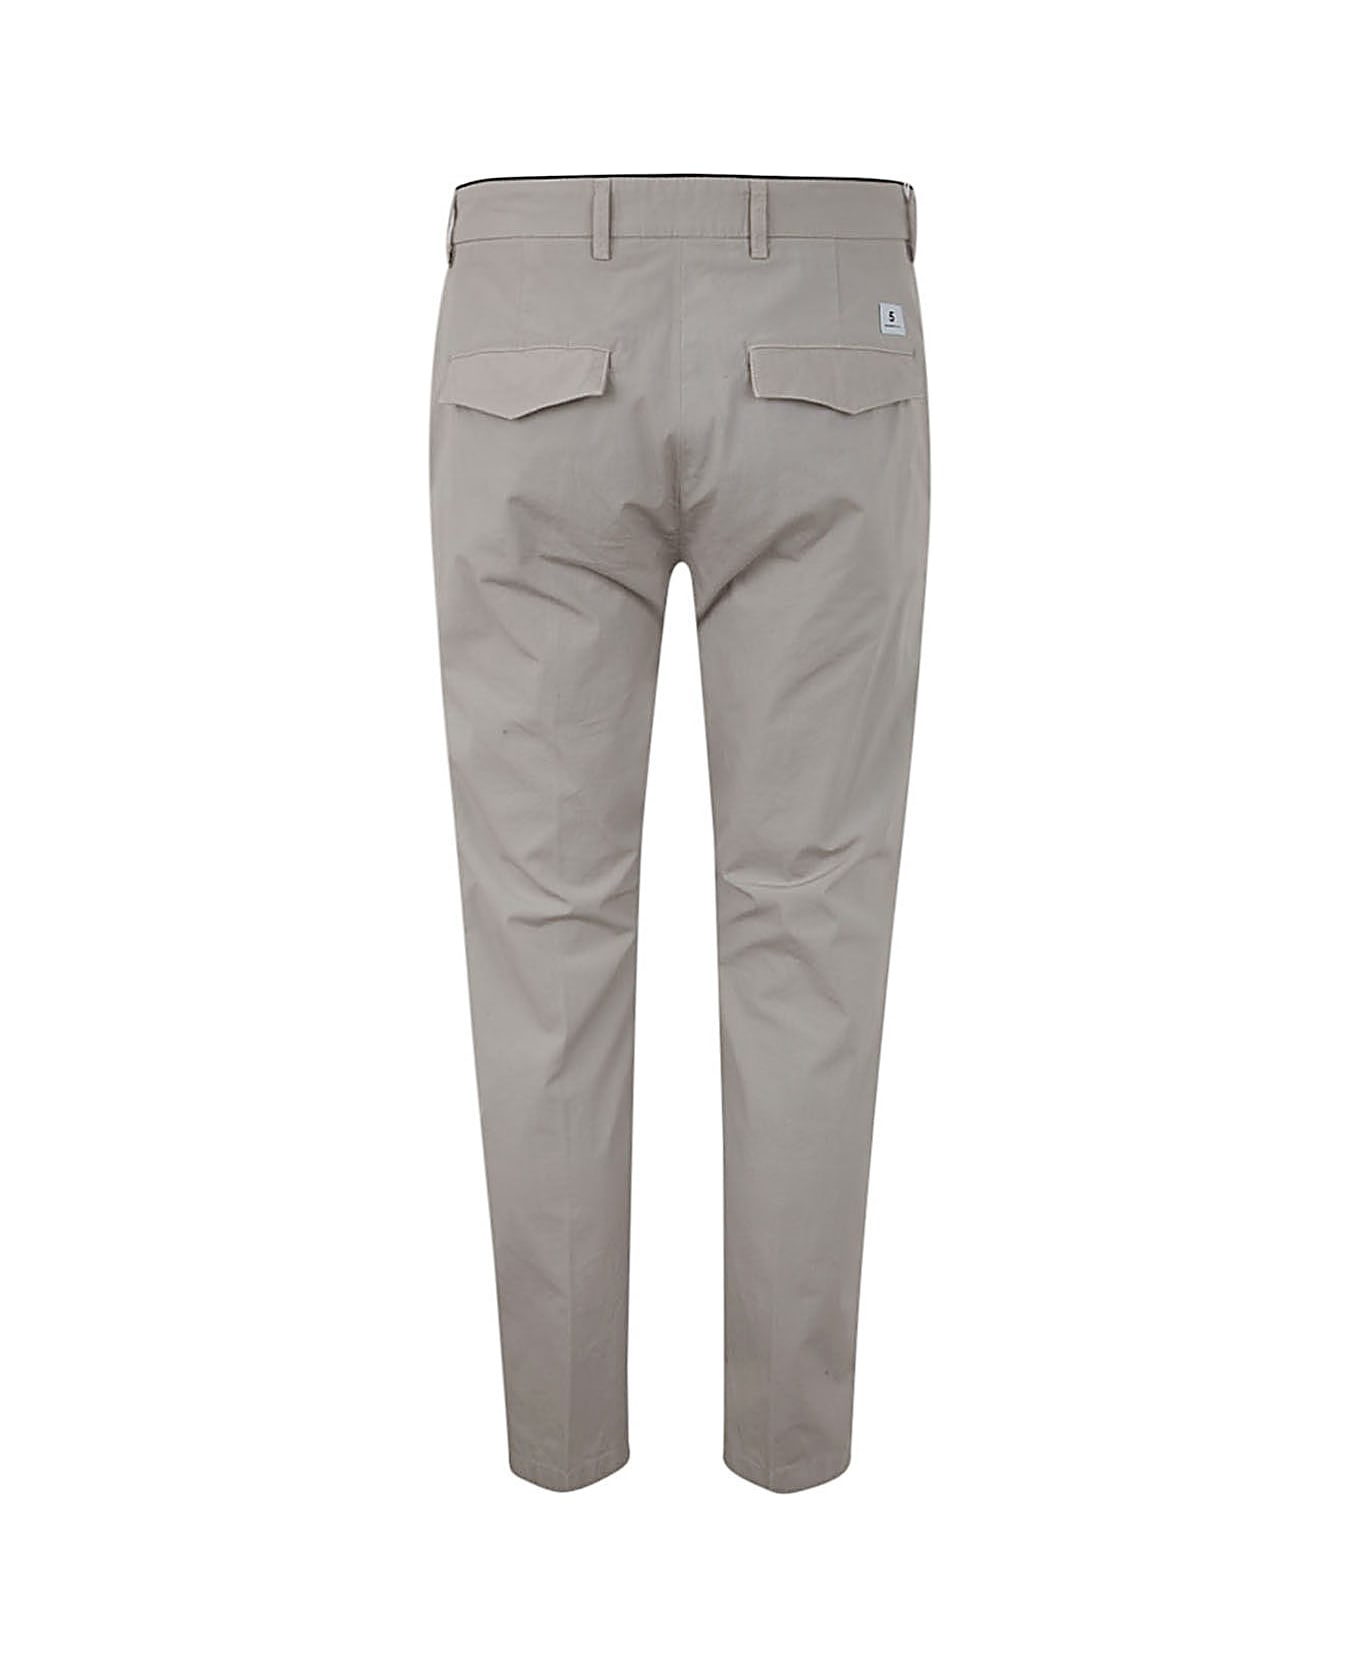 Department Five Prince Crop Chino Trousers - Stucco